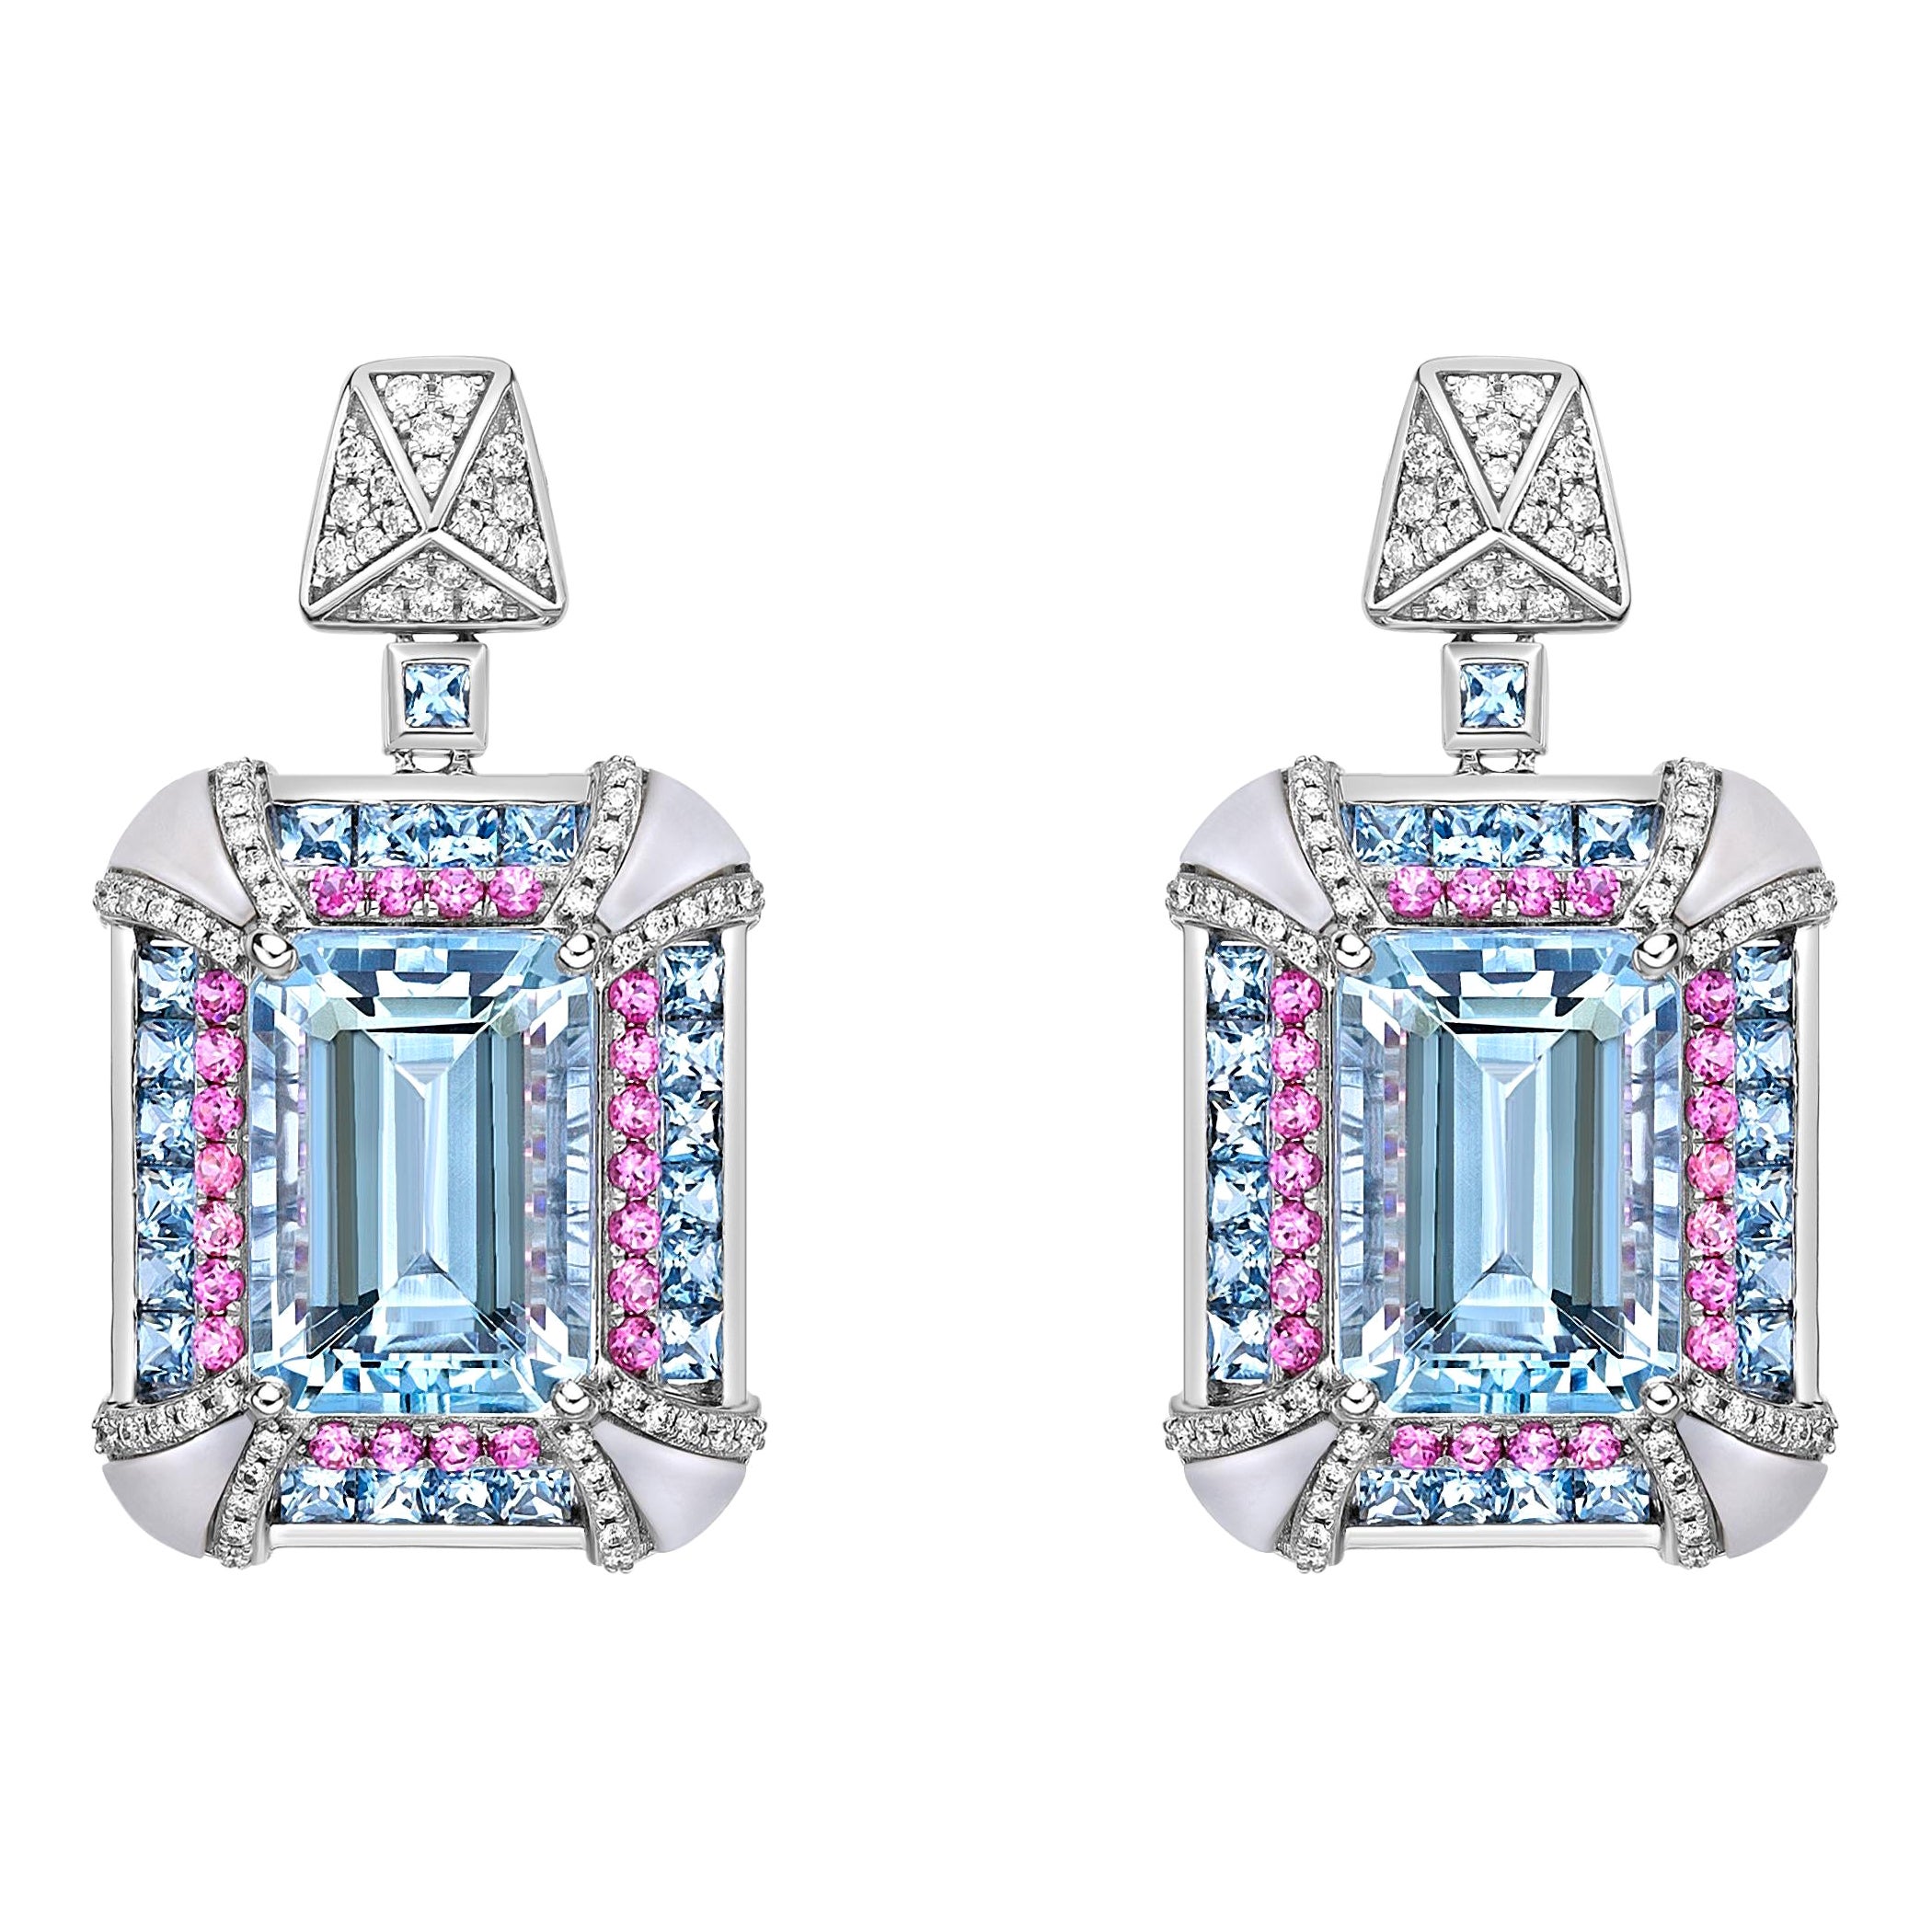 Aquamarine Cocktail Earrings with Mother of Pearl, Spinel & Diamond in 18KWG.